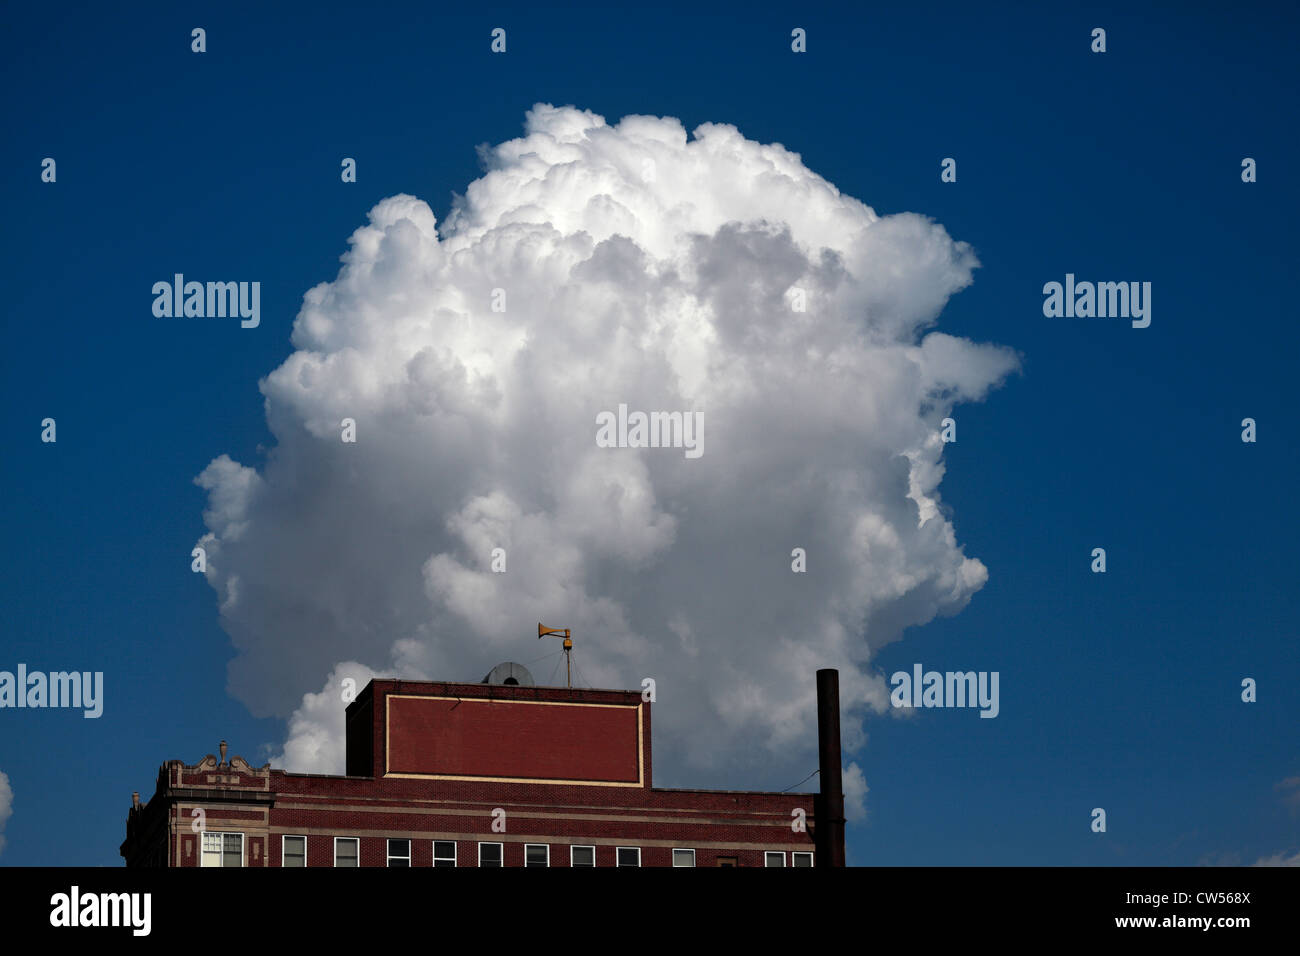 A cumulus cloud rising into the air above & behind a building with an alert siren. Stock Photo